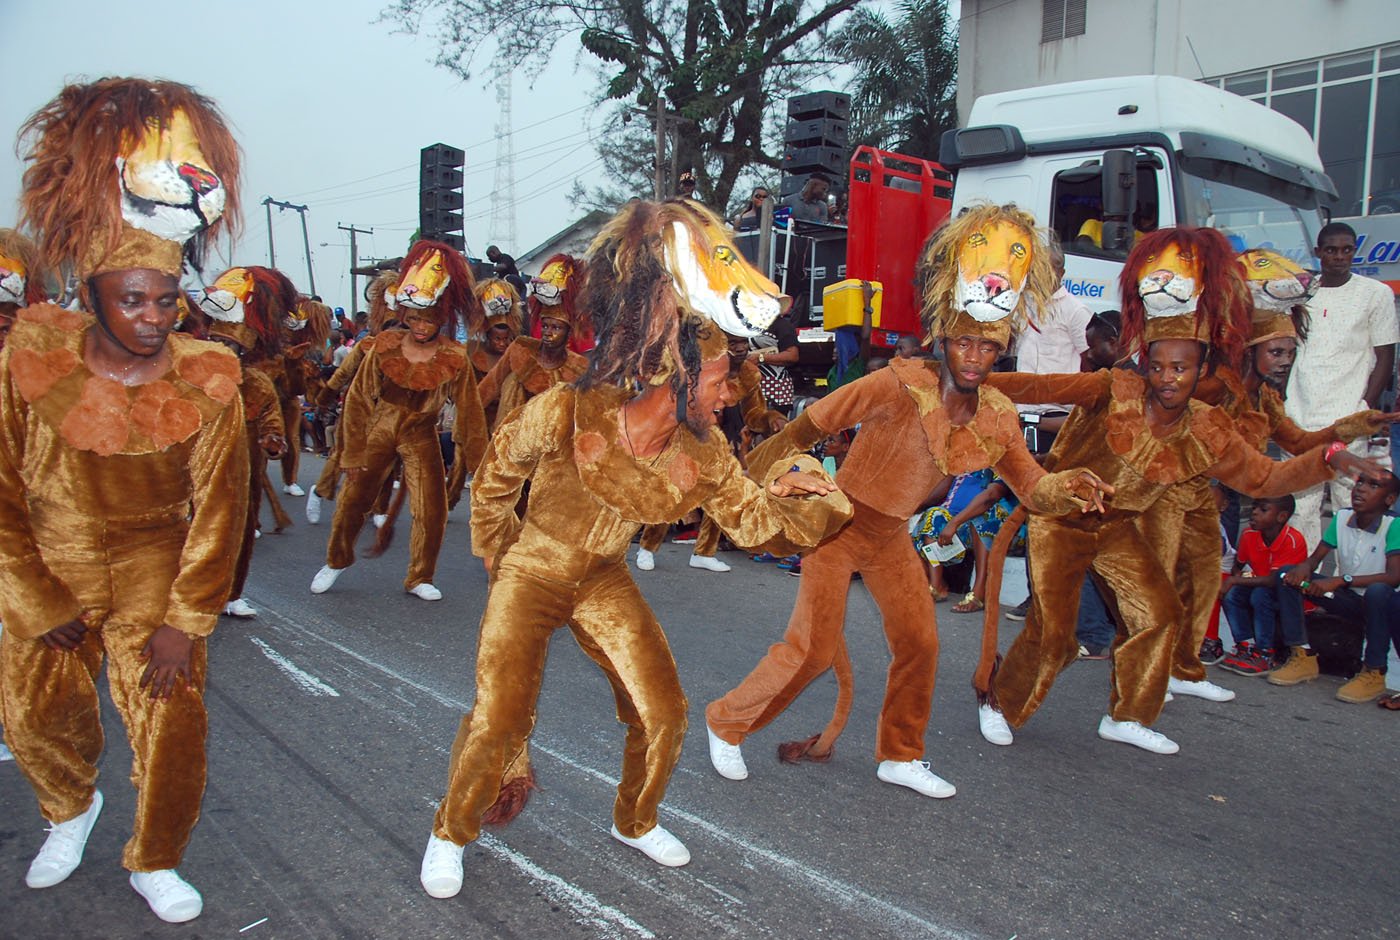 Members of Masta Blasta Band with Lion Costume during the Main Event of the 2017 Carnival Calabar in Cross River State Yesterday. Photo: Nwankpa Chijioke